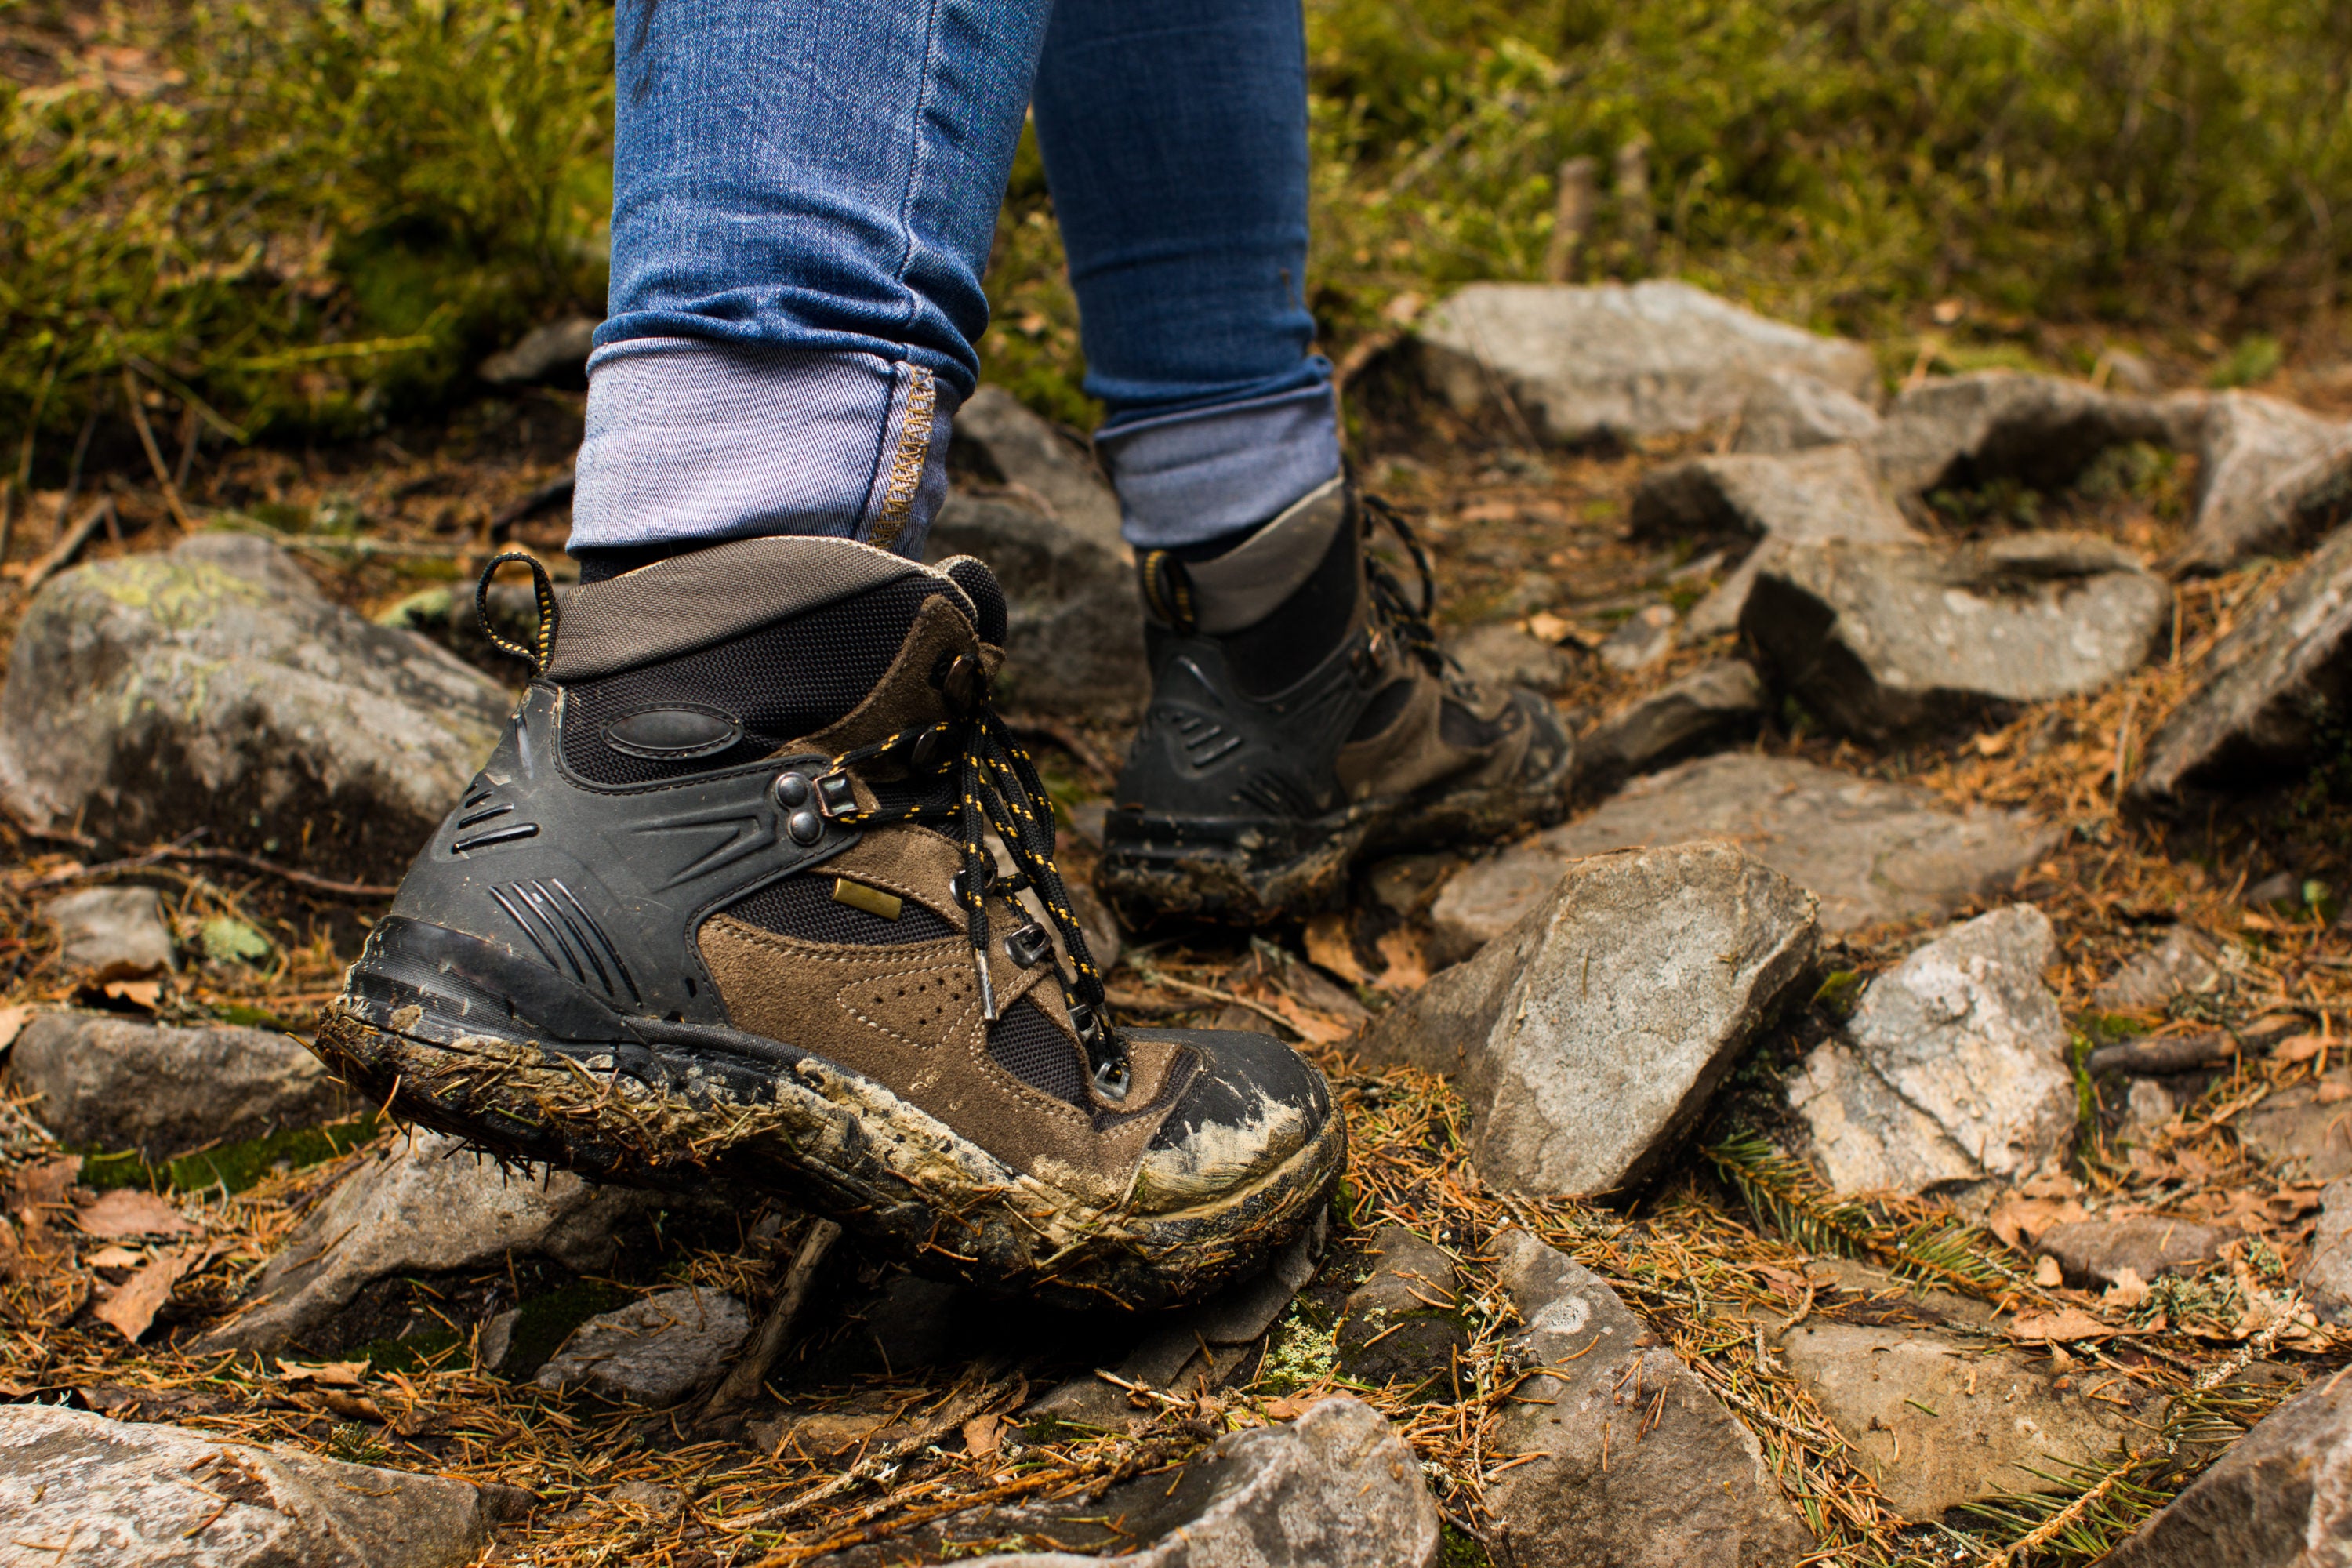 best hiking boots for orthotics